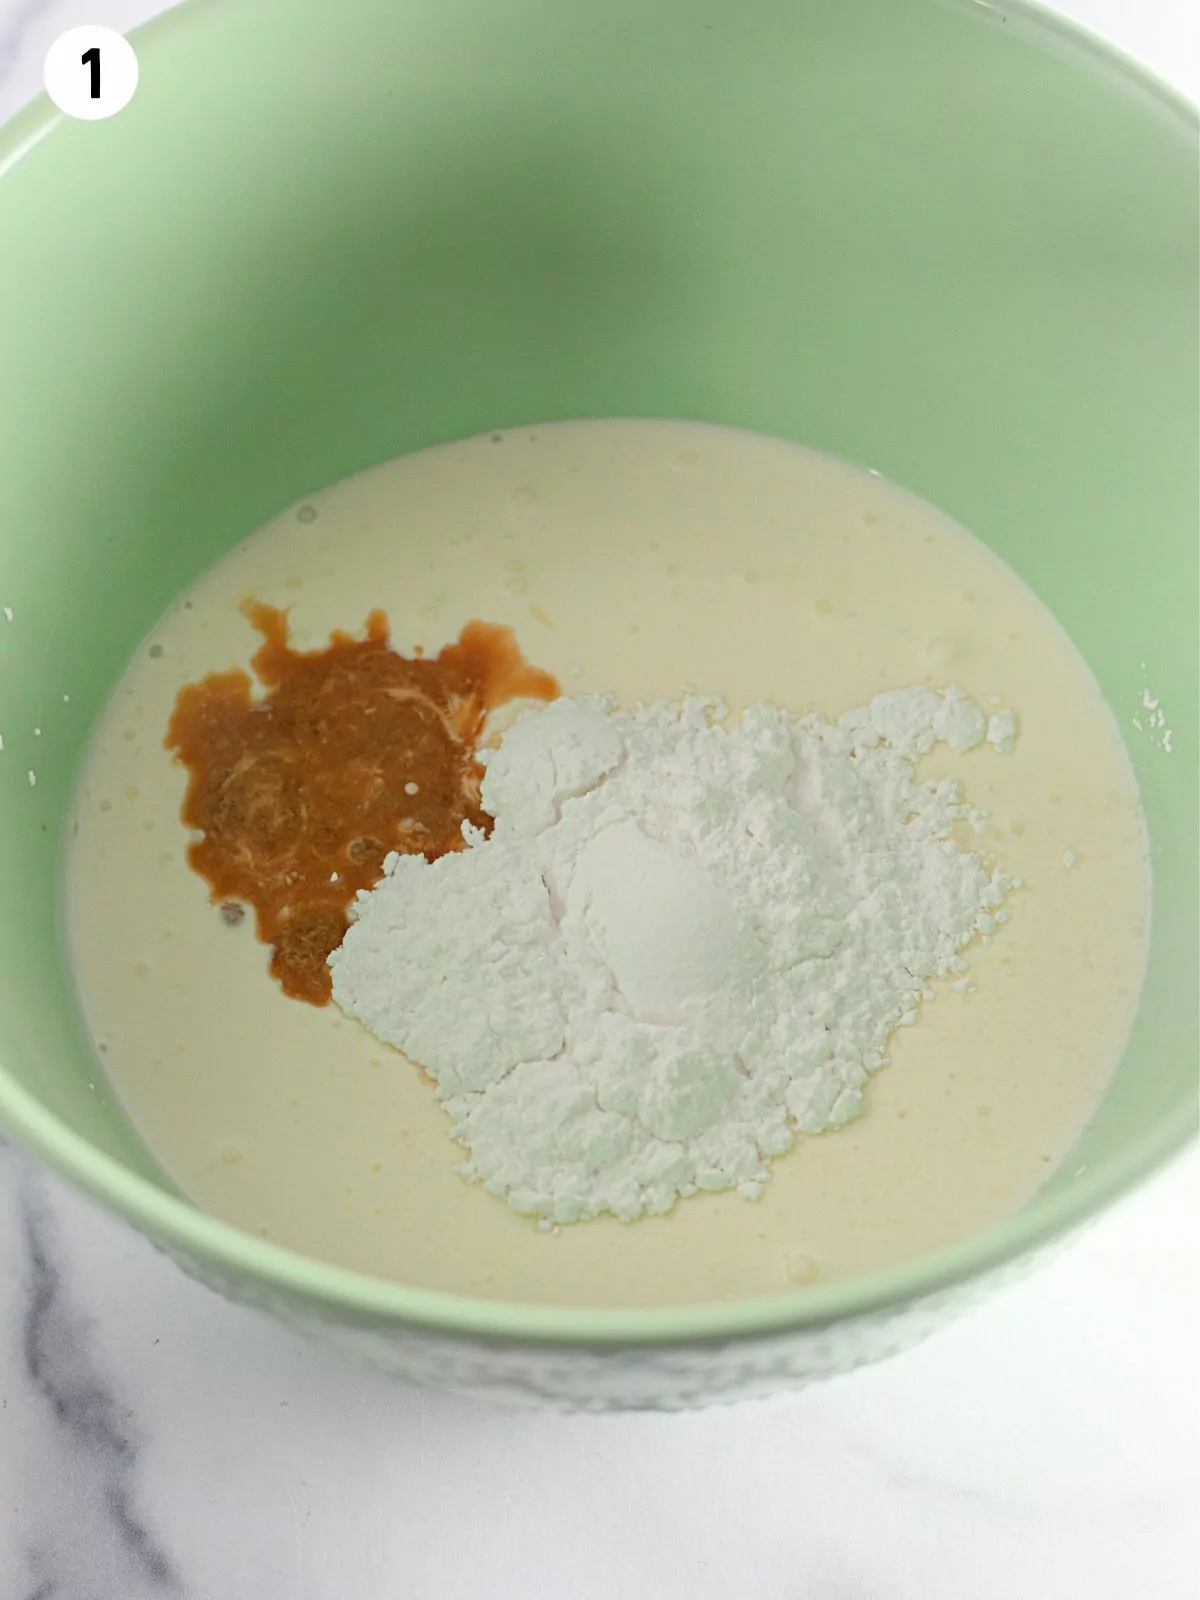 Pudding mix with milk and vanilla extract in bowl.